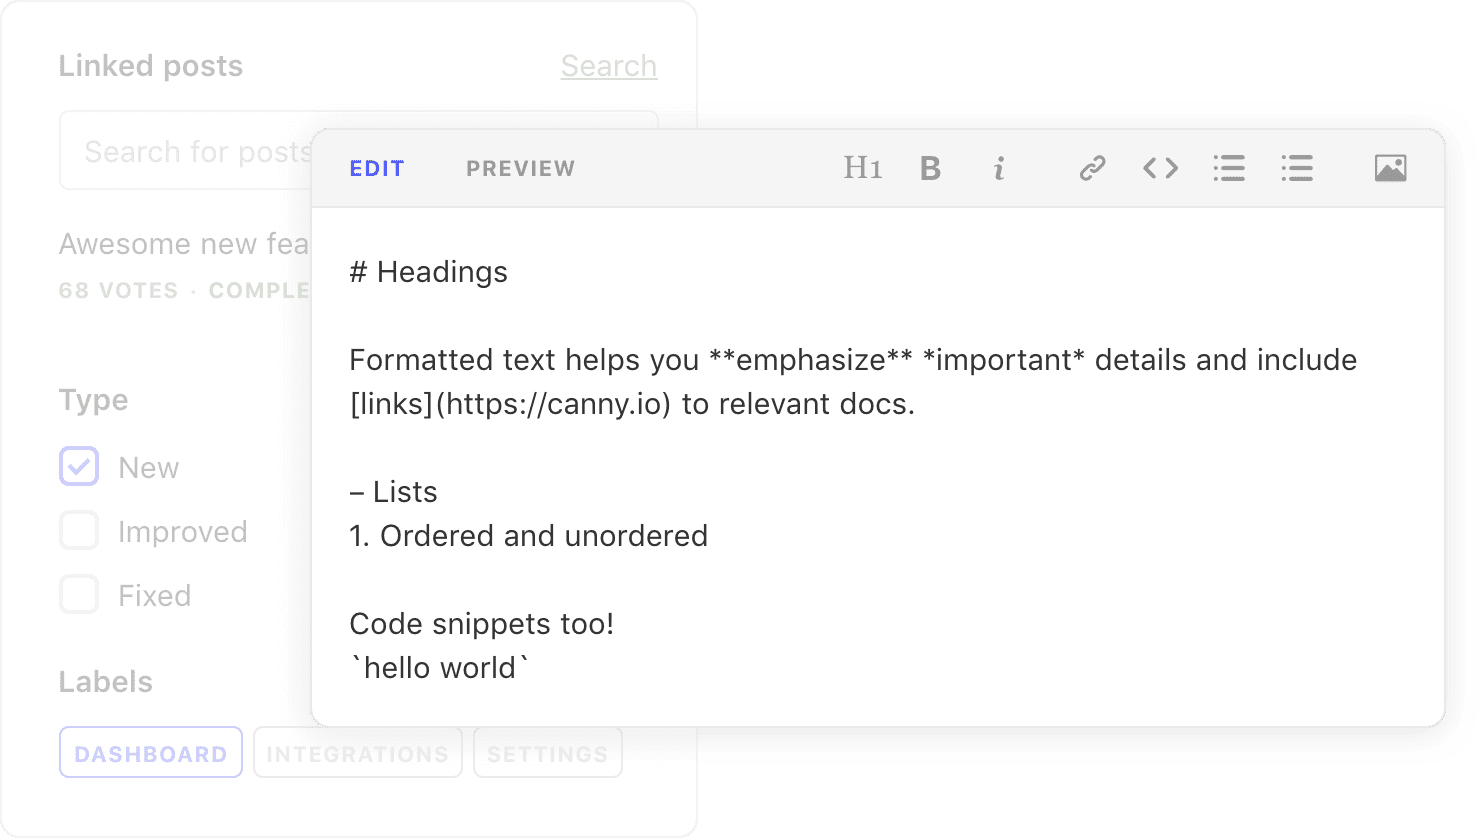 Product changelog that is markdown supported